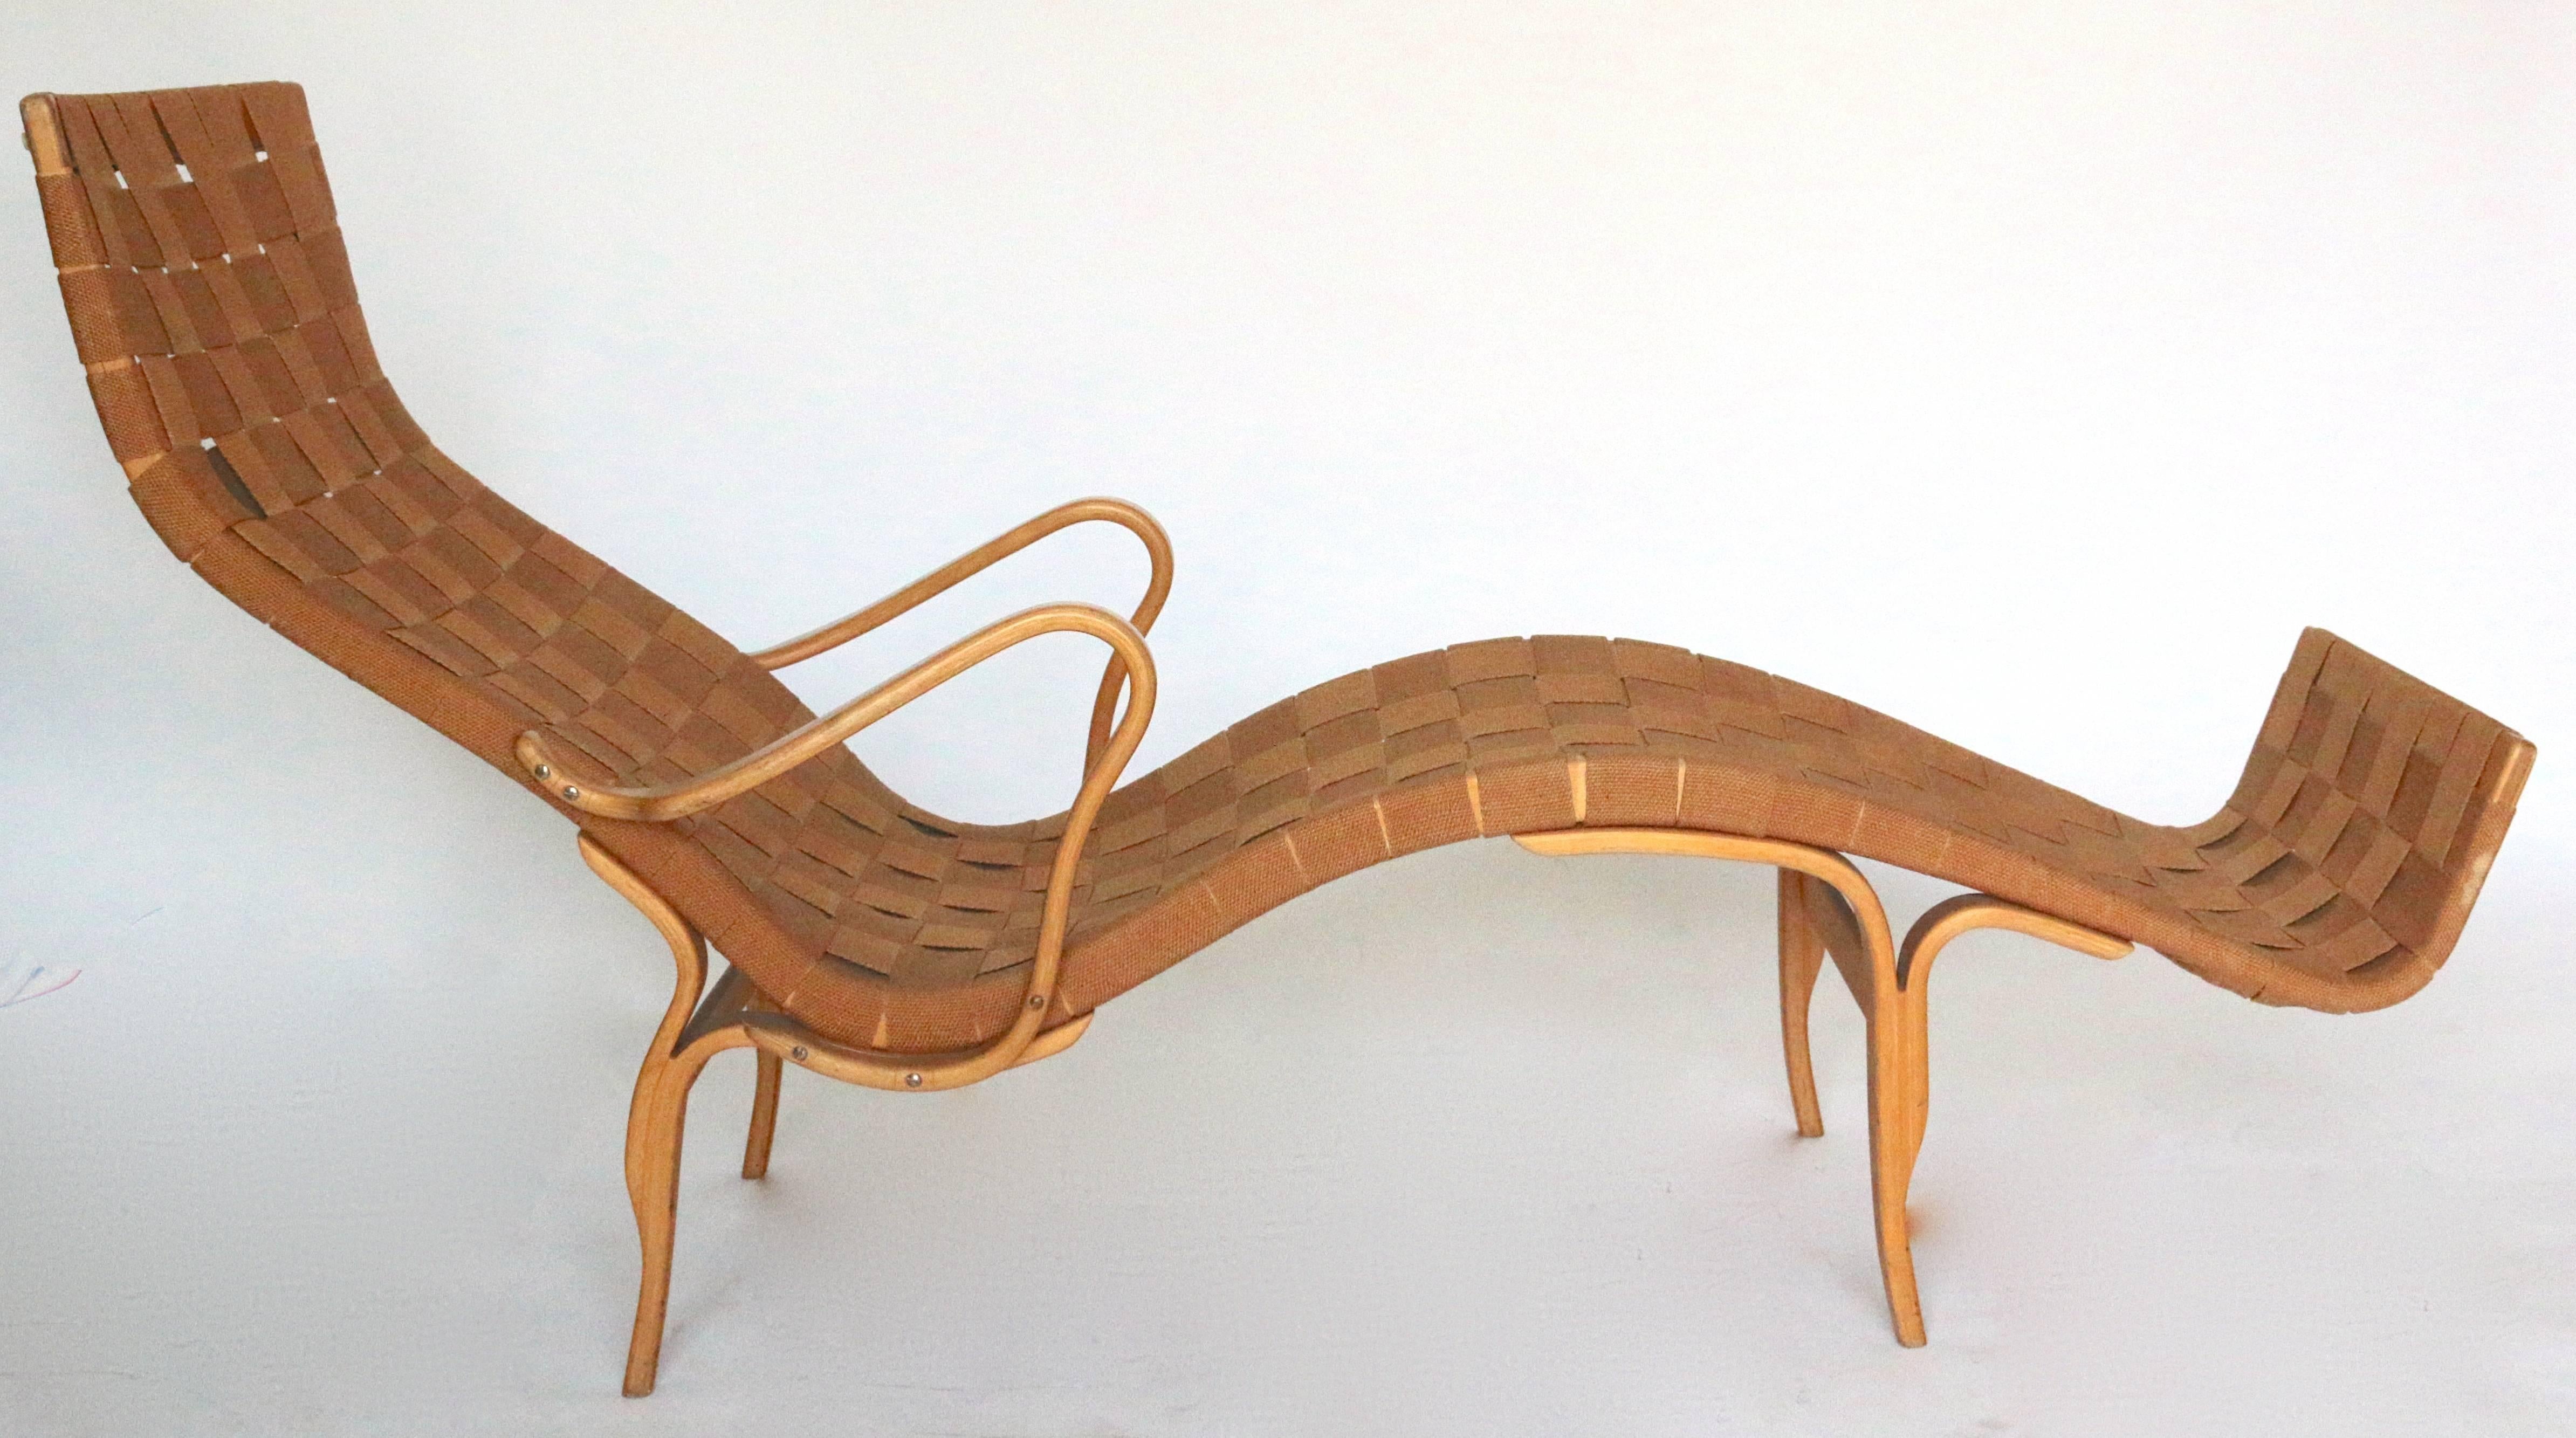 Mid-Century Modern Lounge chair Designed by Bruno Mathsson.
Made in 1961 by Karl Mathsson in Varnamo, Sweden.
Solid birch frame with bentwood beech arms and legs 
with all original webbing in excellent used condition.
Signed by maker, imprinted